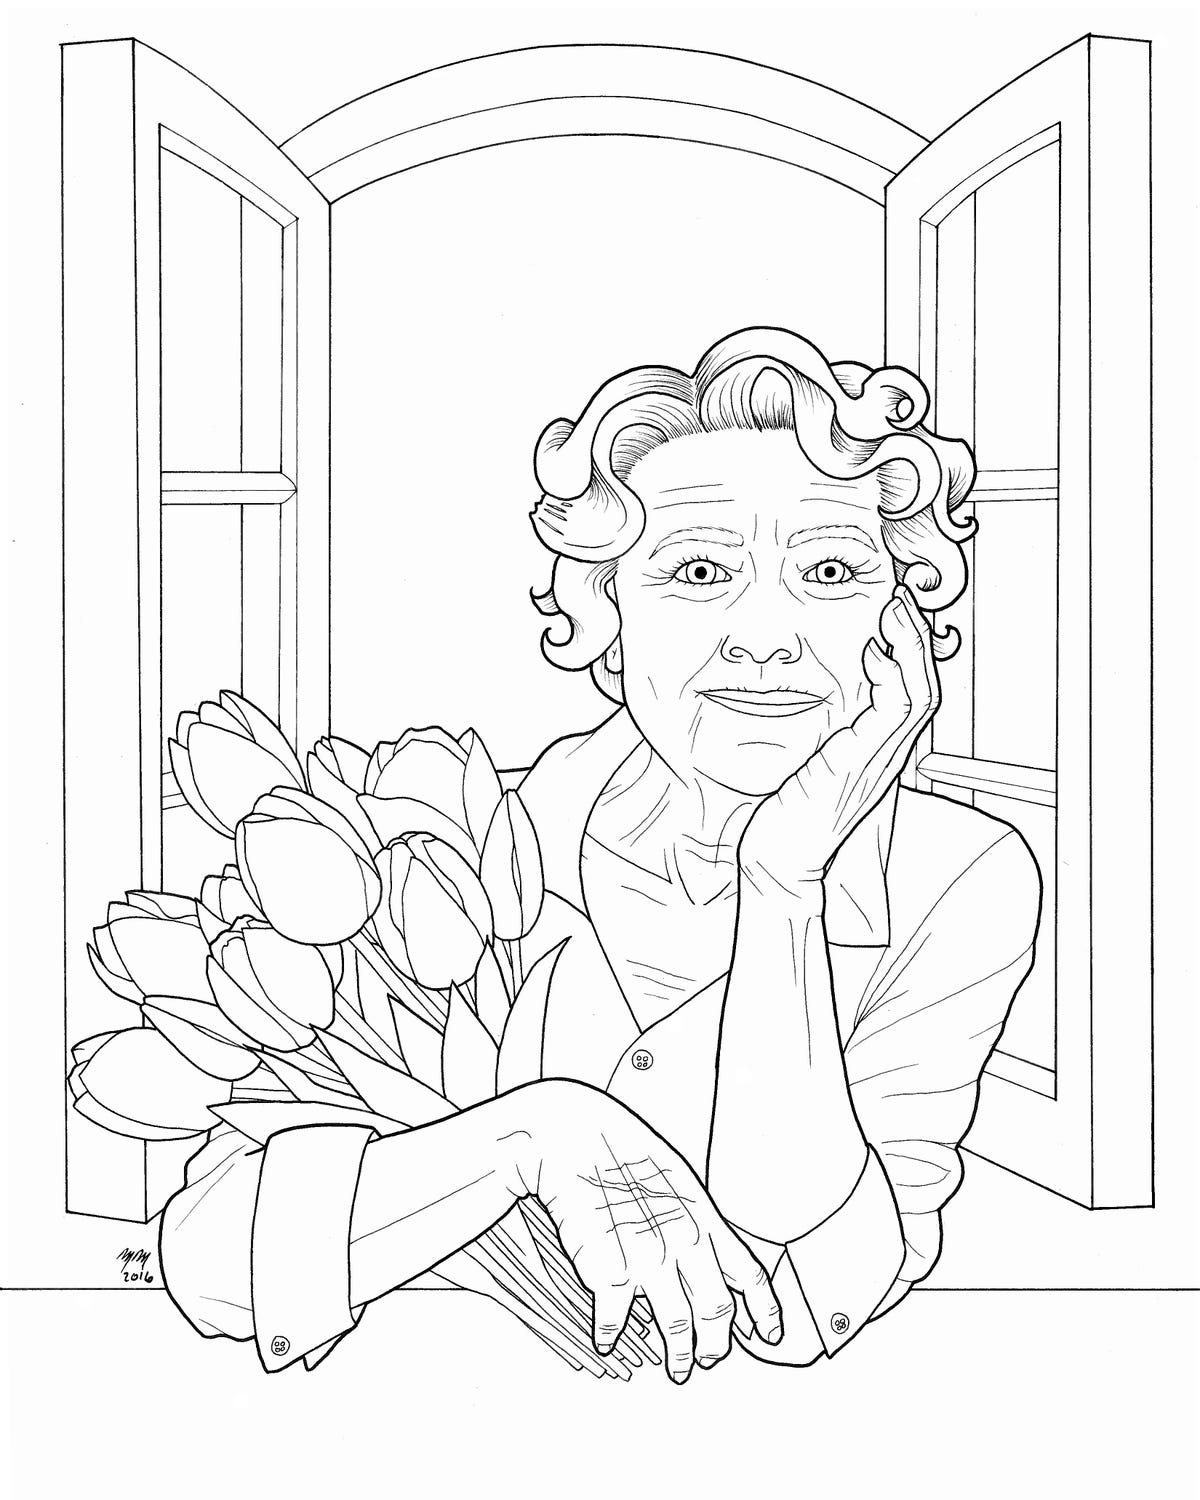 Harpers Ferry artist publishes adult coloring book